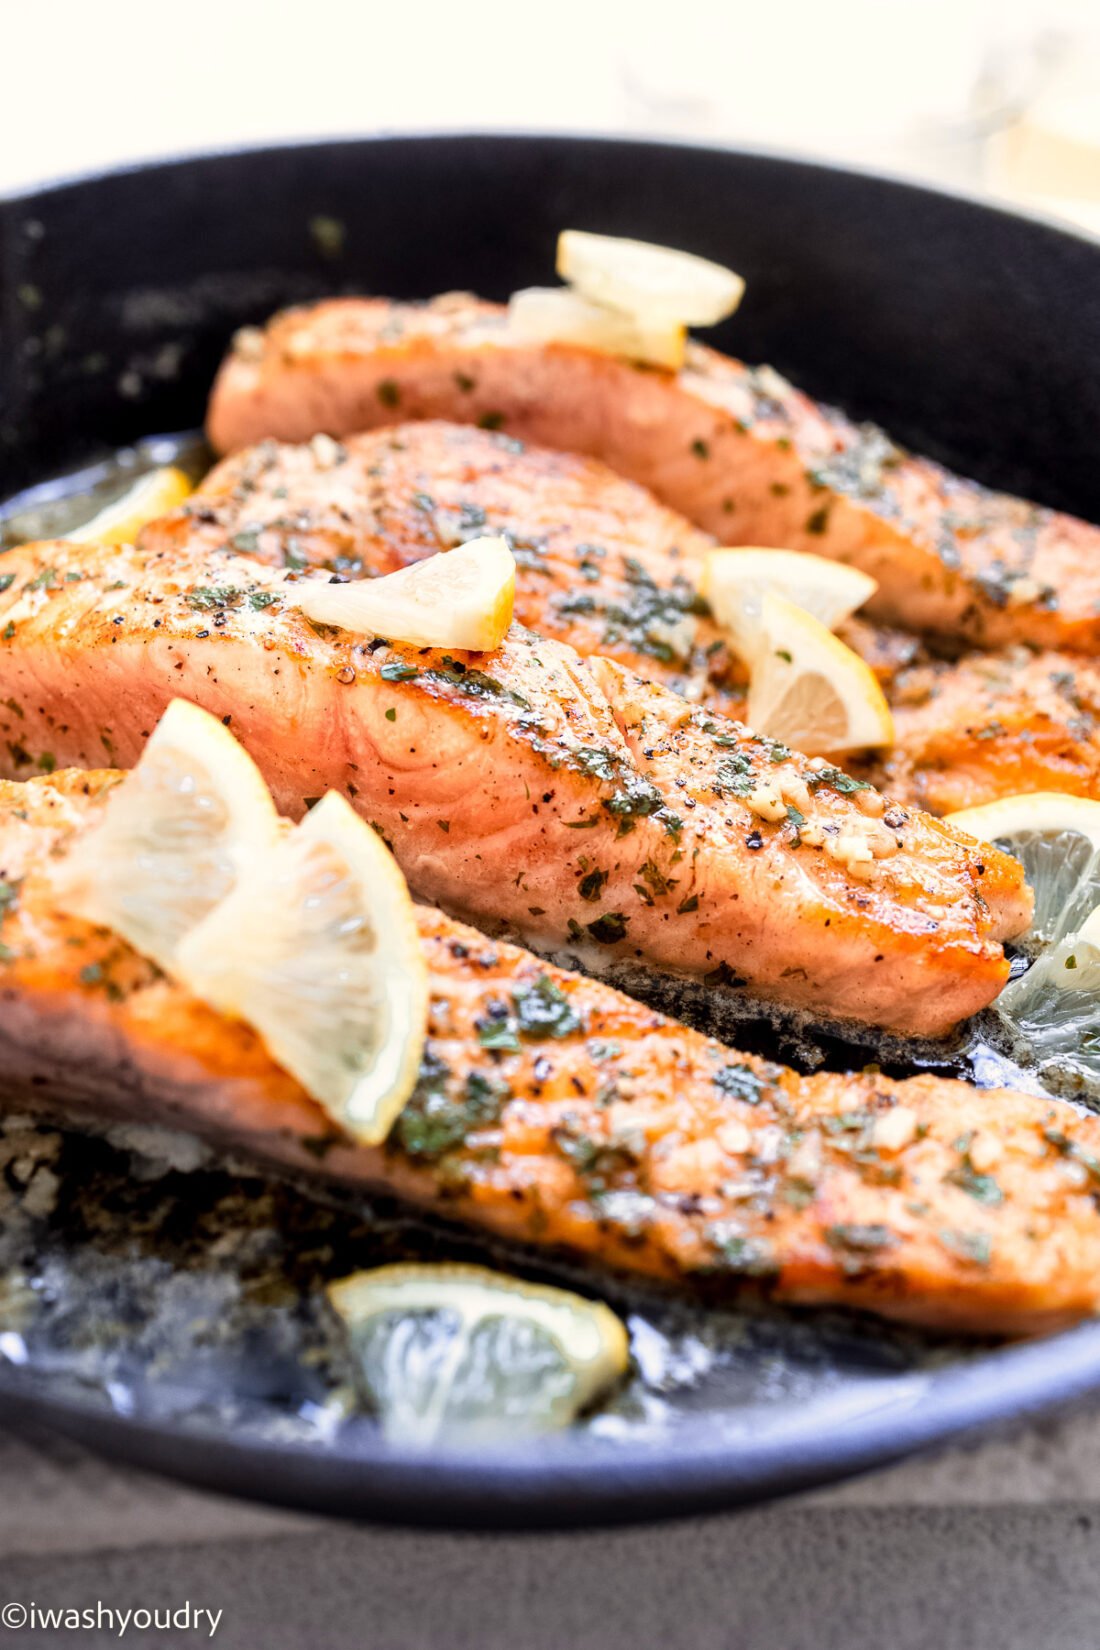 Cooked sliced of salmon in metal pan with lemon slices.